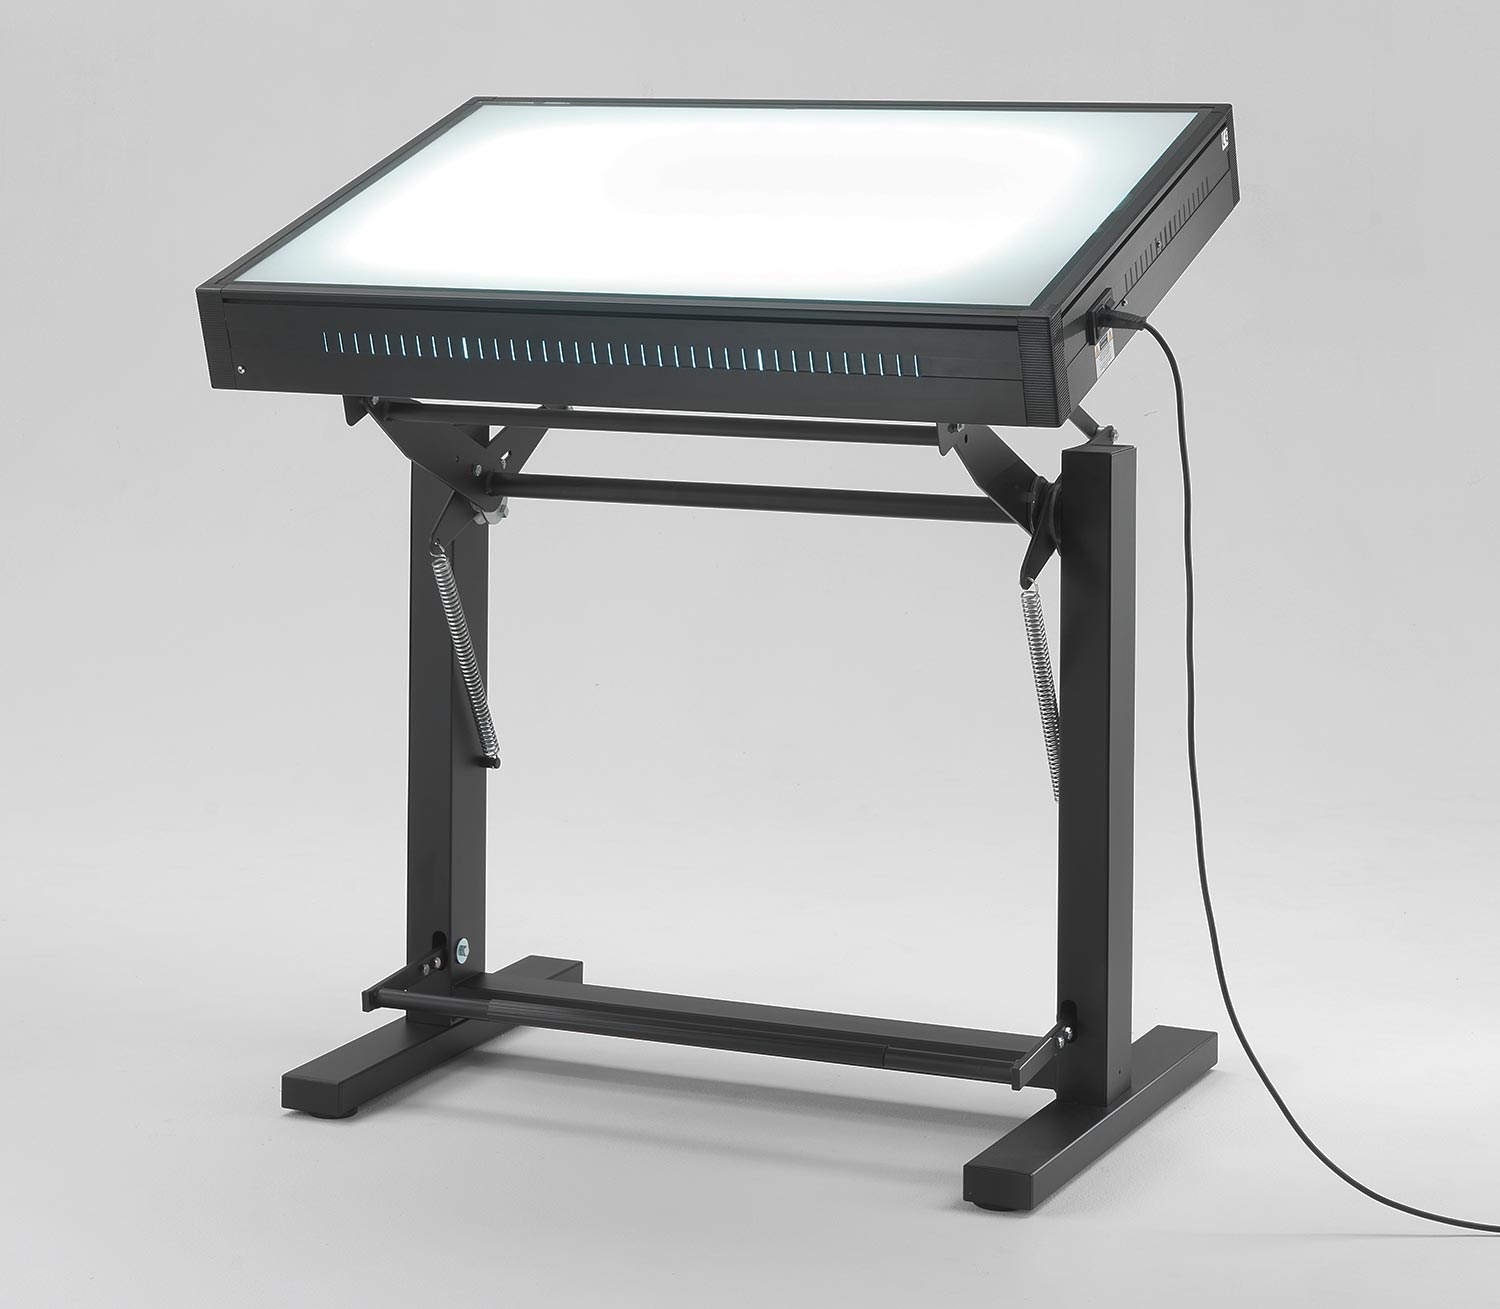 Light Tables and Light Boxes for drafting, architect, designer Emme